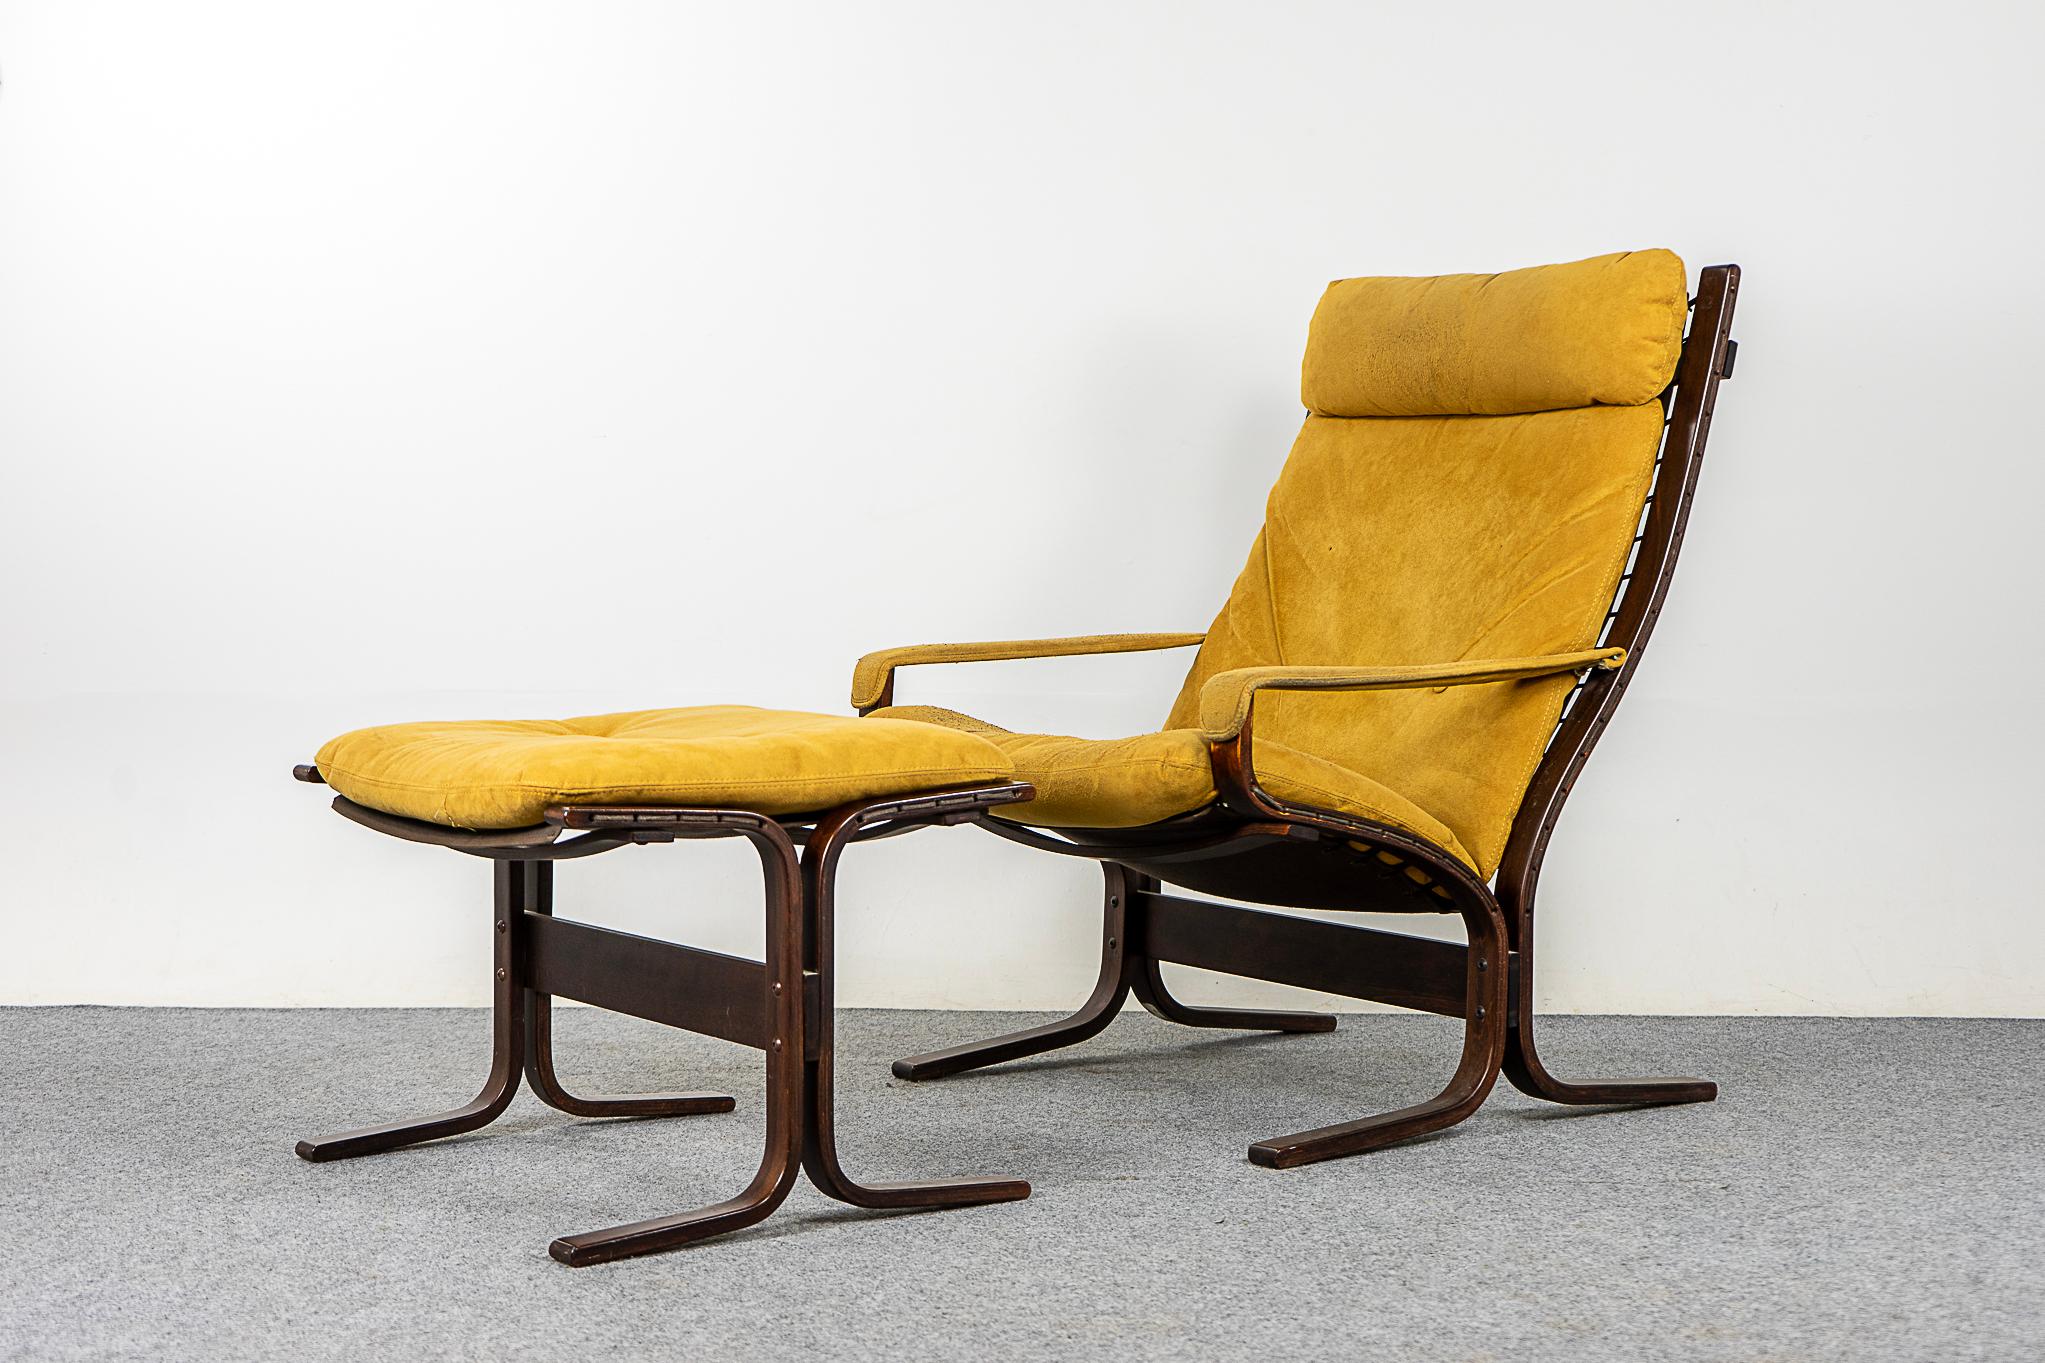 Beech wood and suede Norwegian siesta lounge chair + footstool by Ingmar Relling for Westnofa, circa 1960's. Bent plywood frame supports an extremely comfortable hammock style floating seat. High back provides great neck support. Original tufted